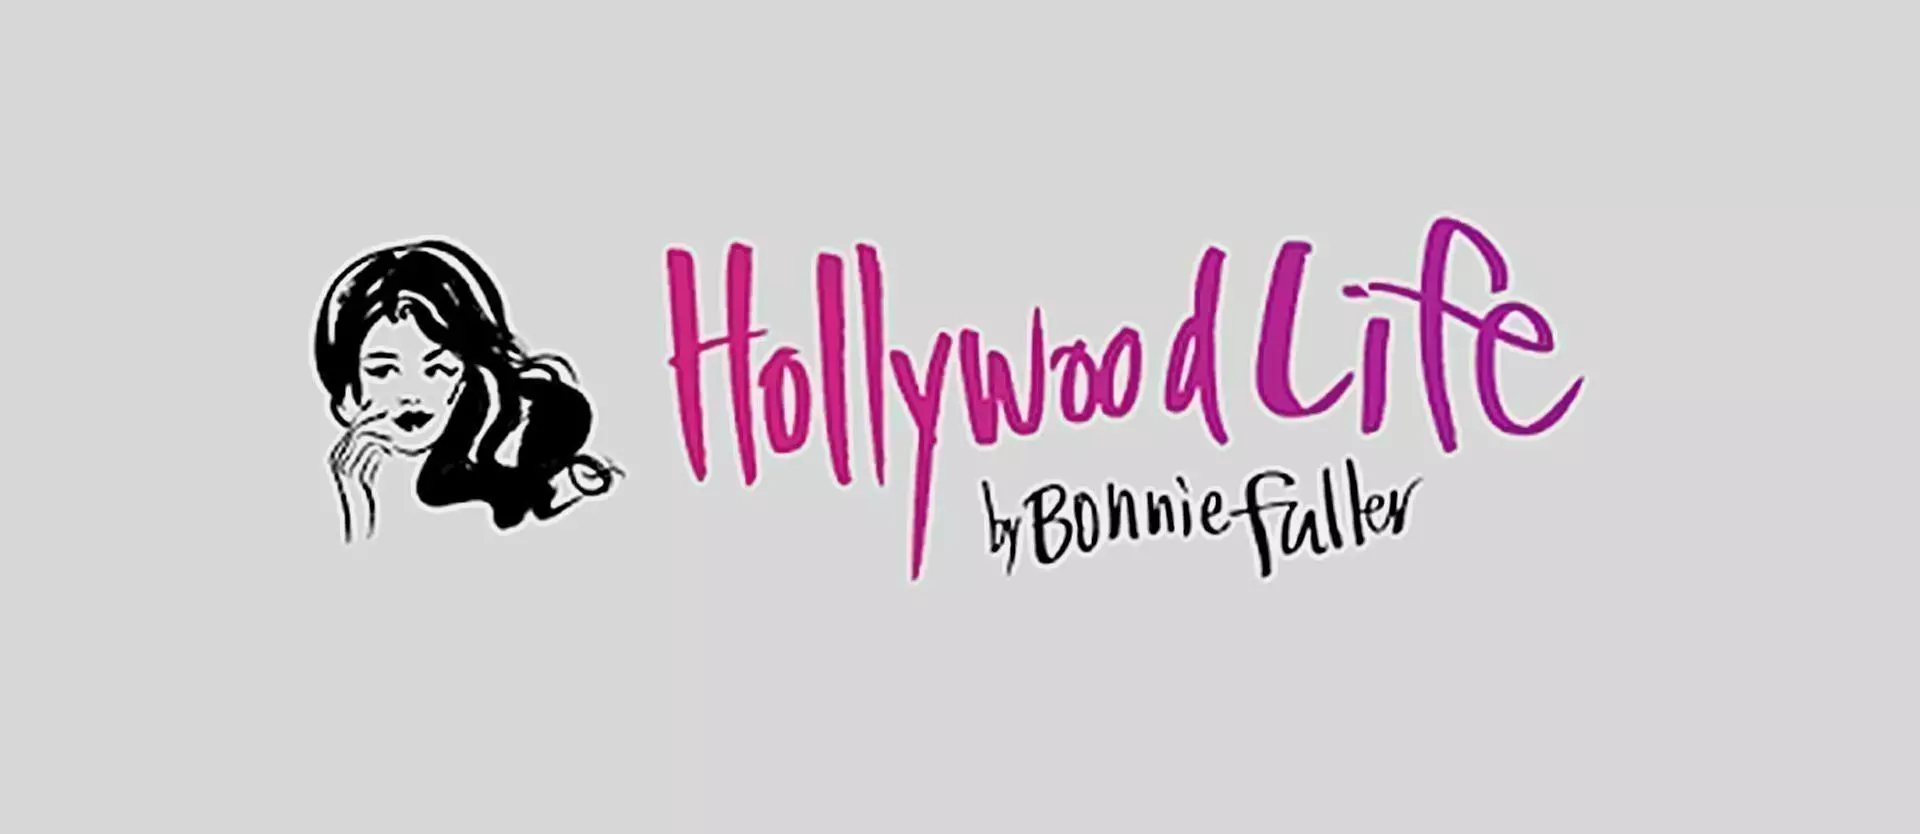 Unique Hair Concepts Founder featured in Hollywood Life, an online celebrity news outlet 